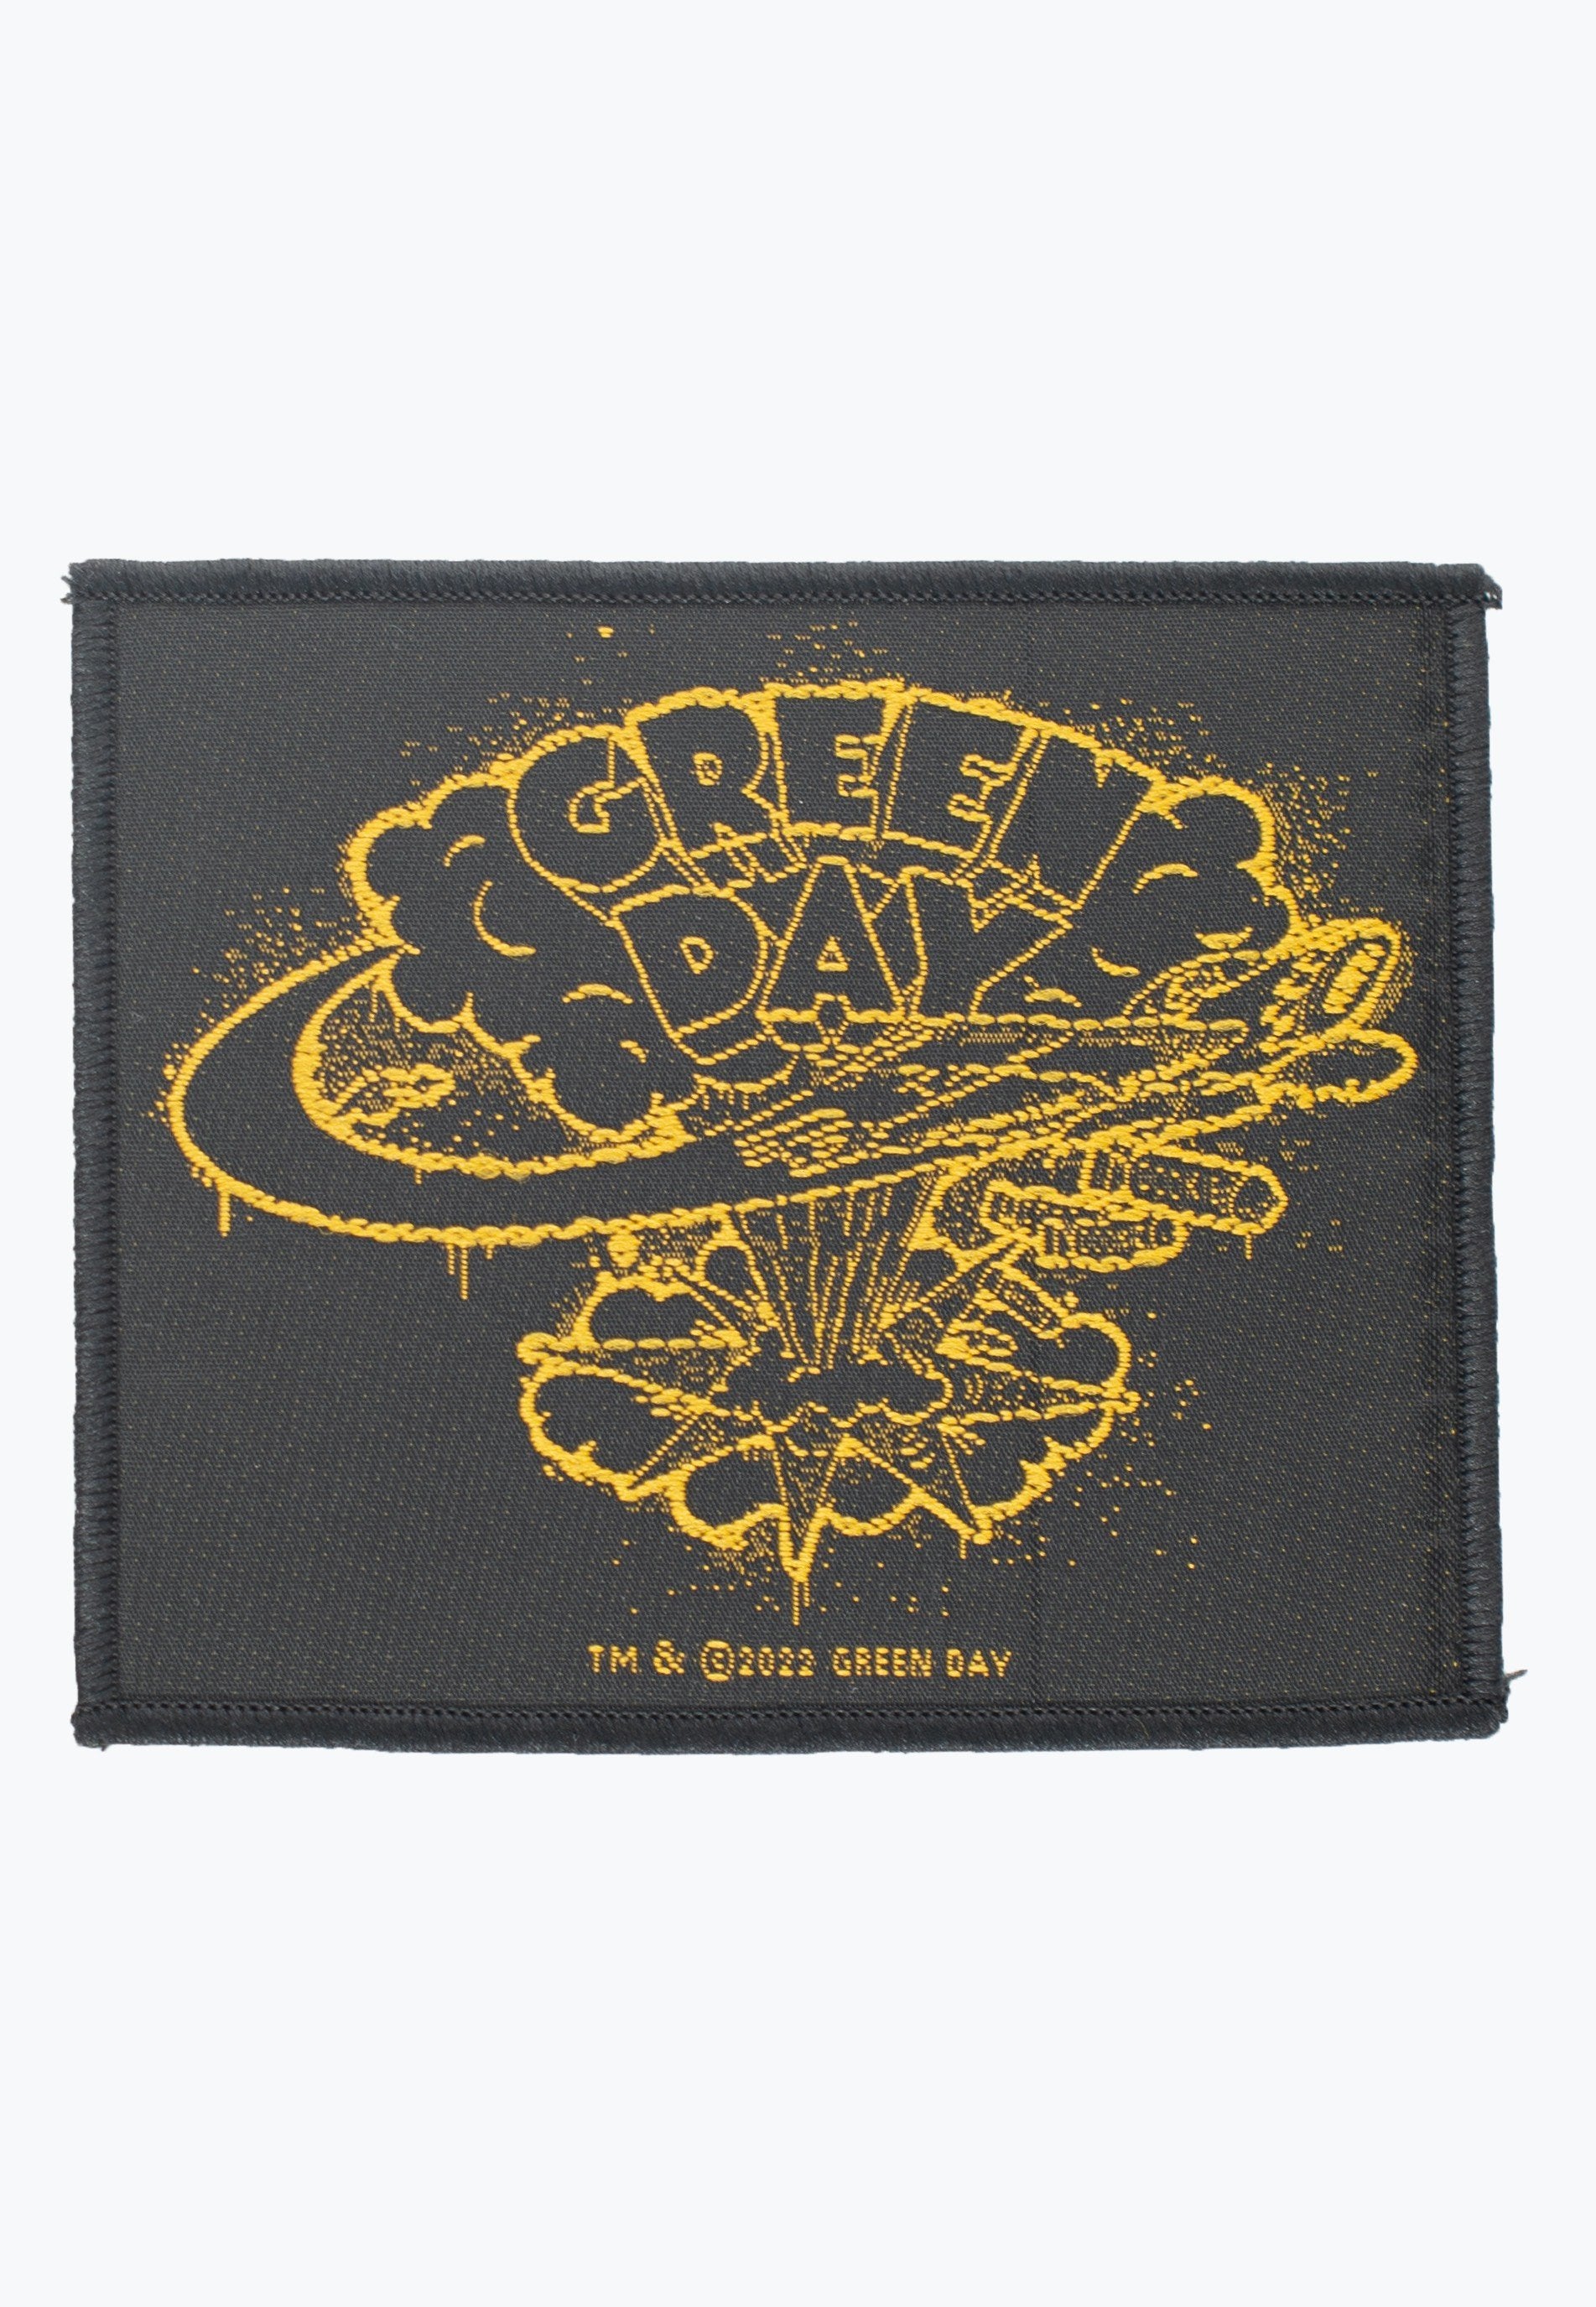 Green Day - Dookie - Patch